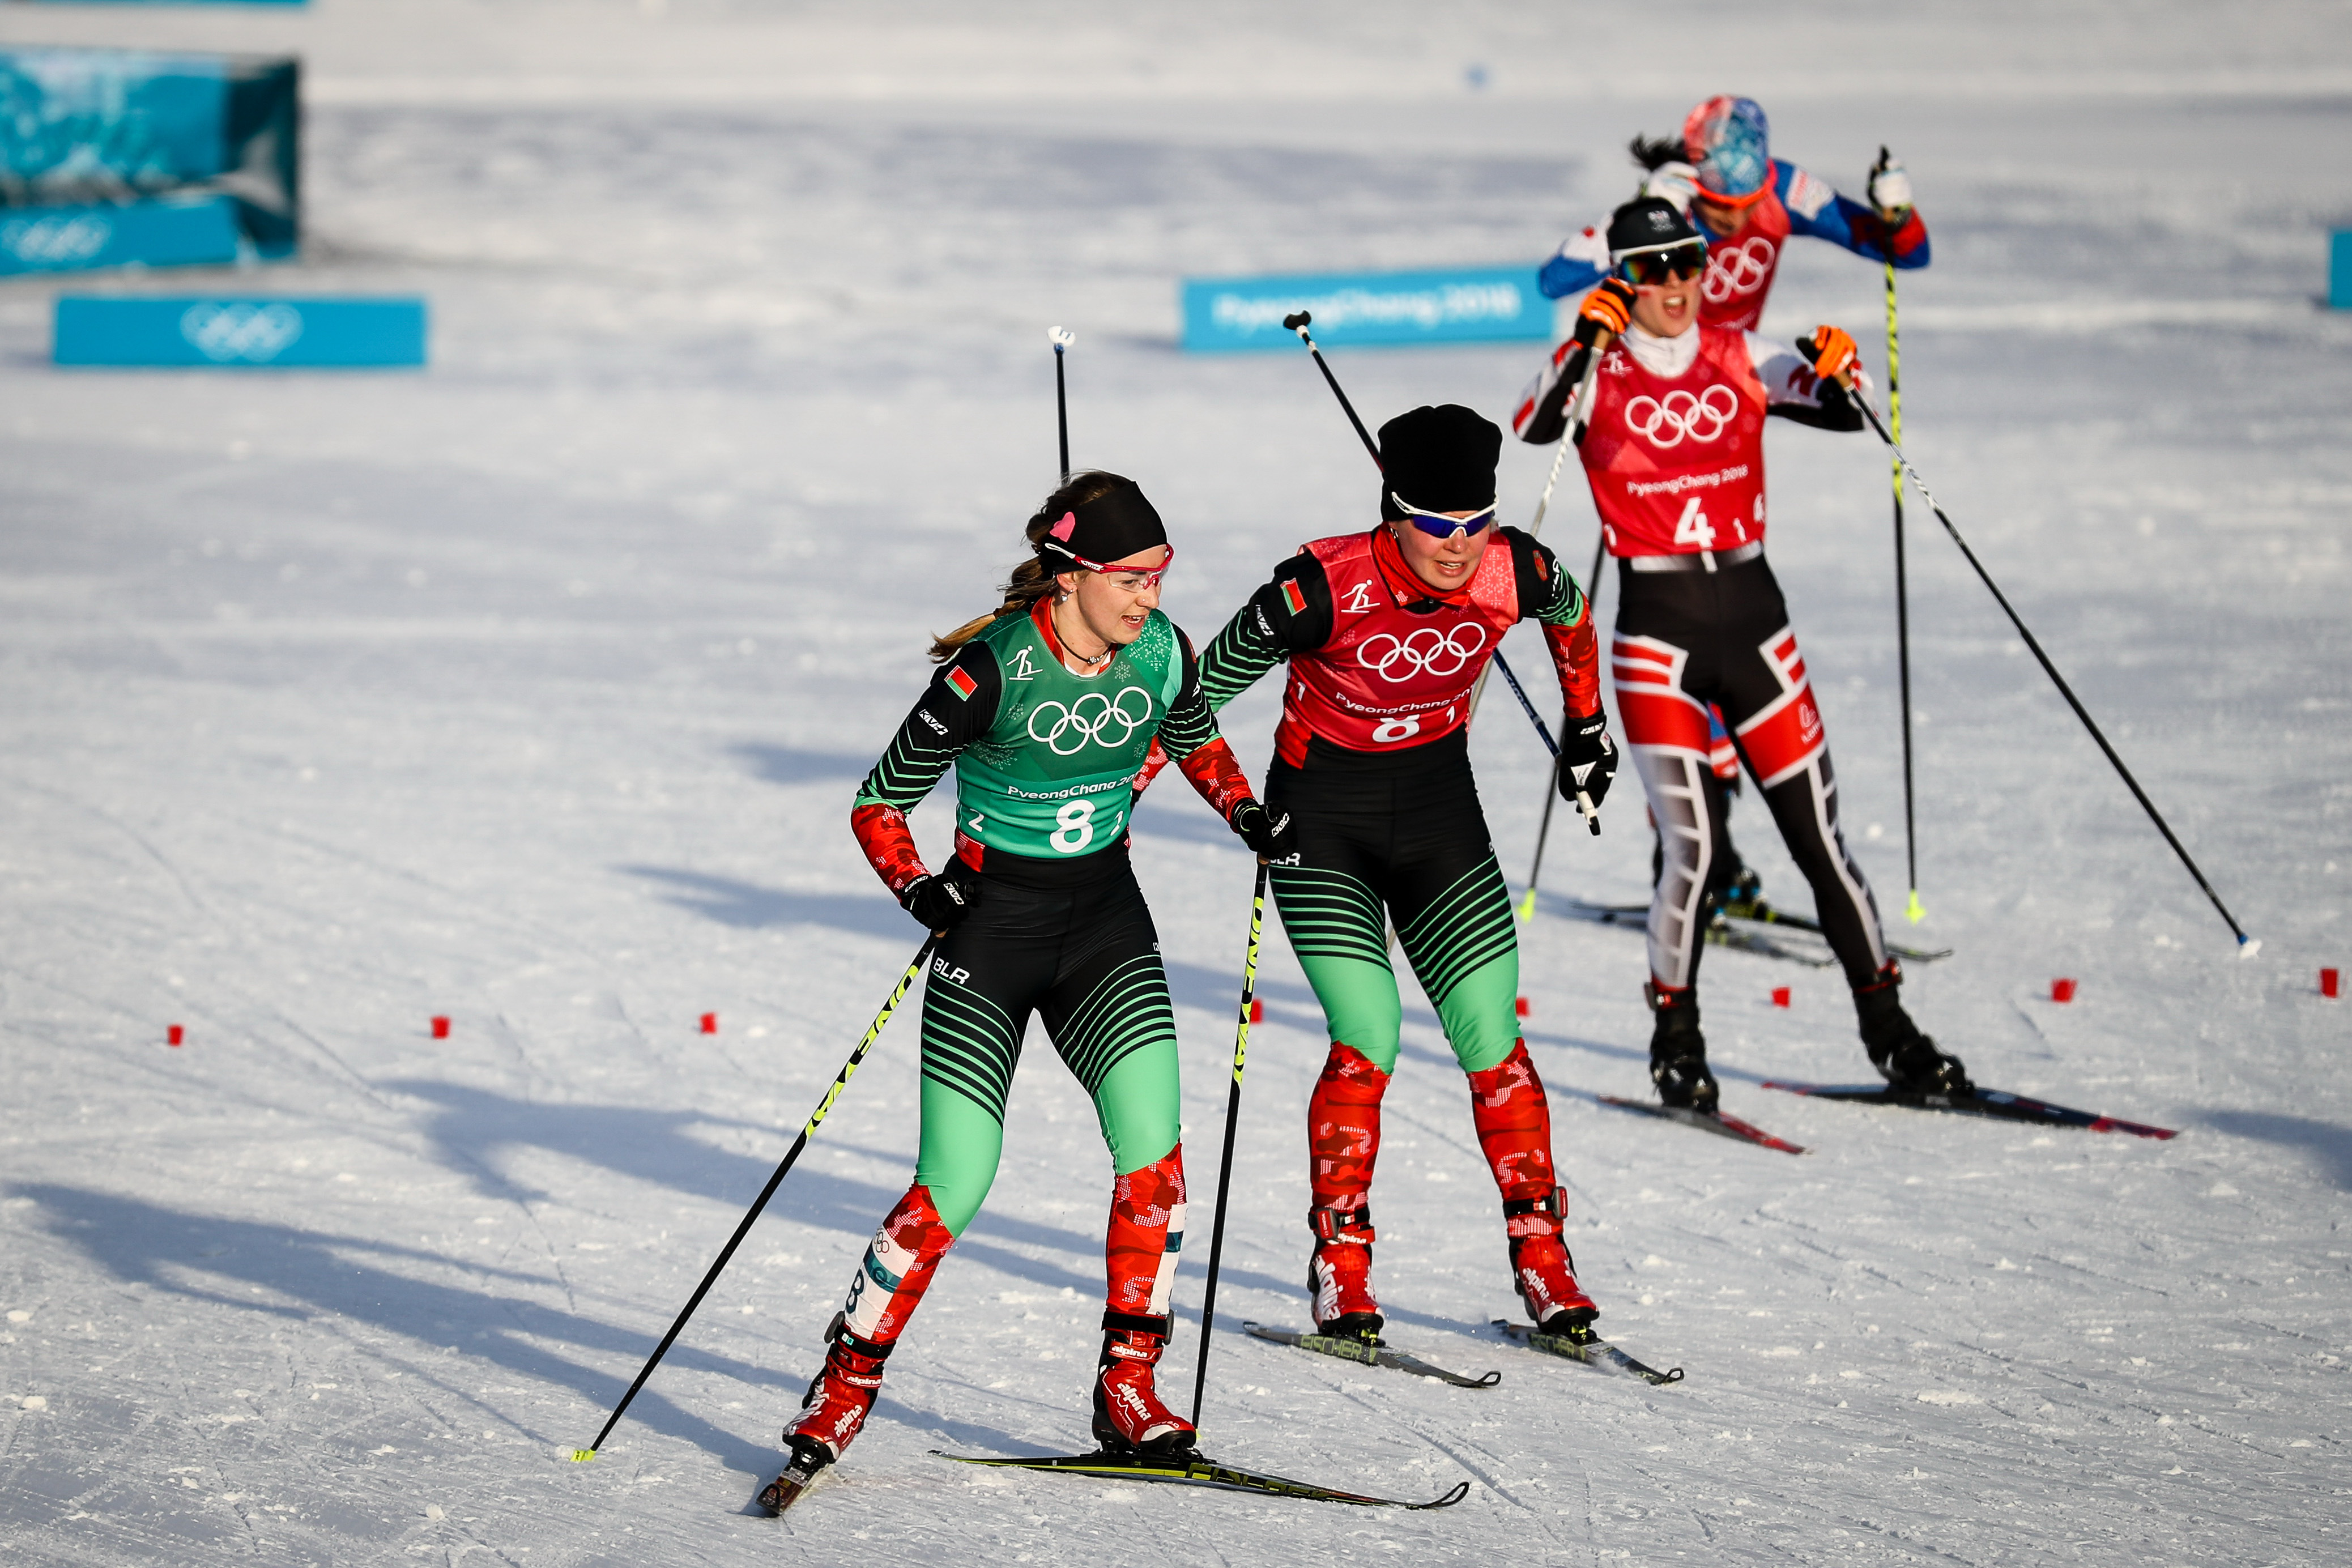 PyeongChang 2018. Belarusian skiers failed to qualify for team sprint finals